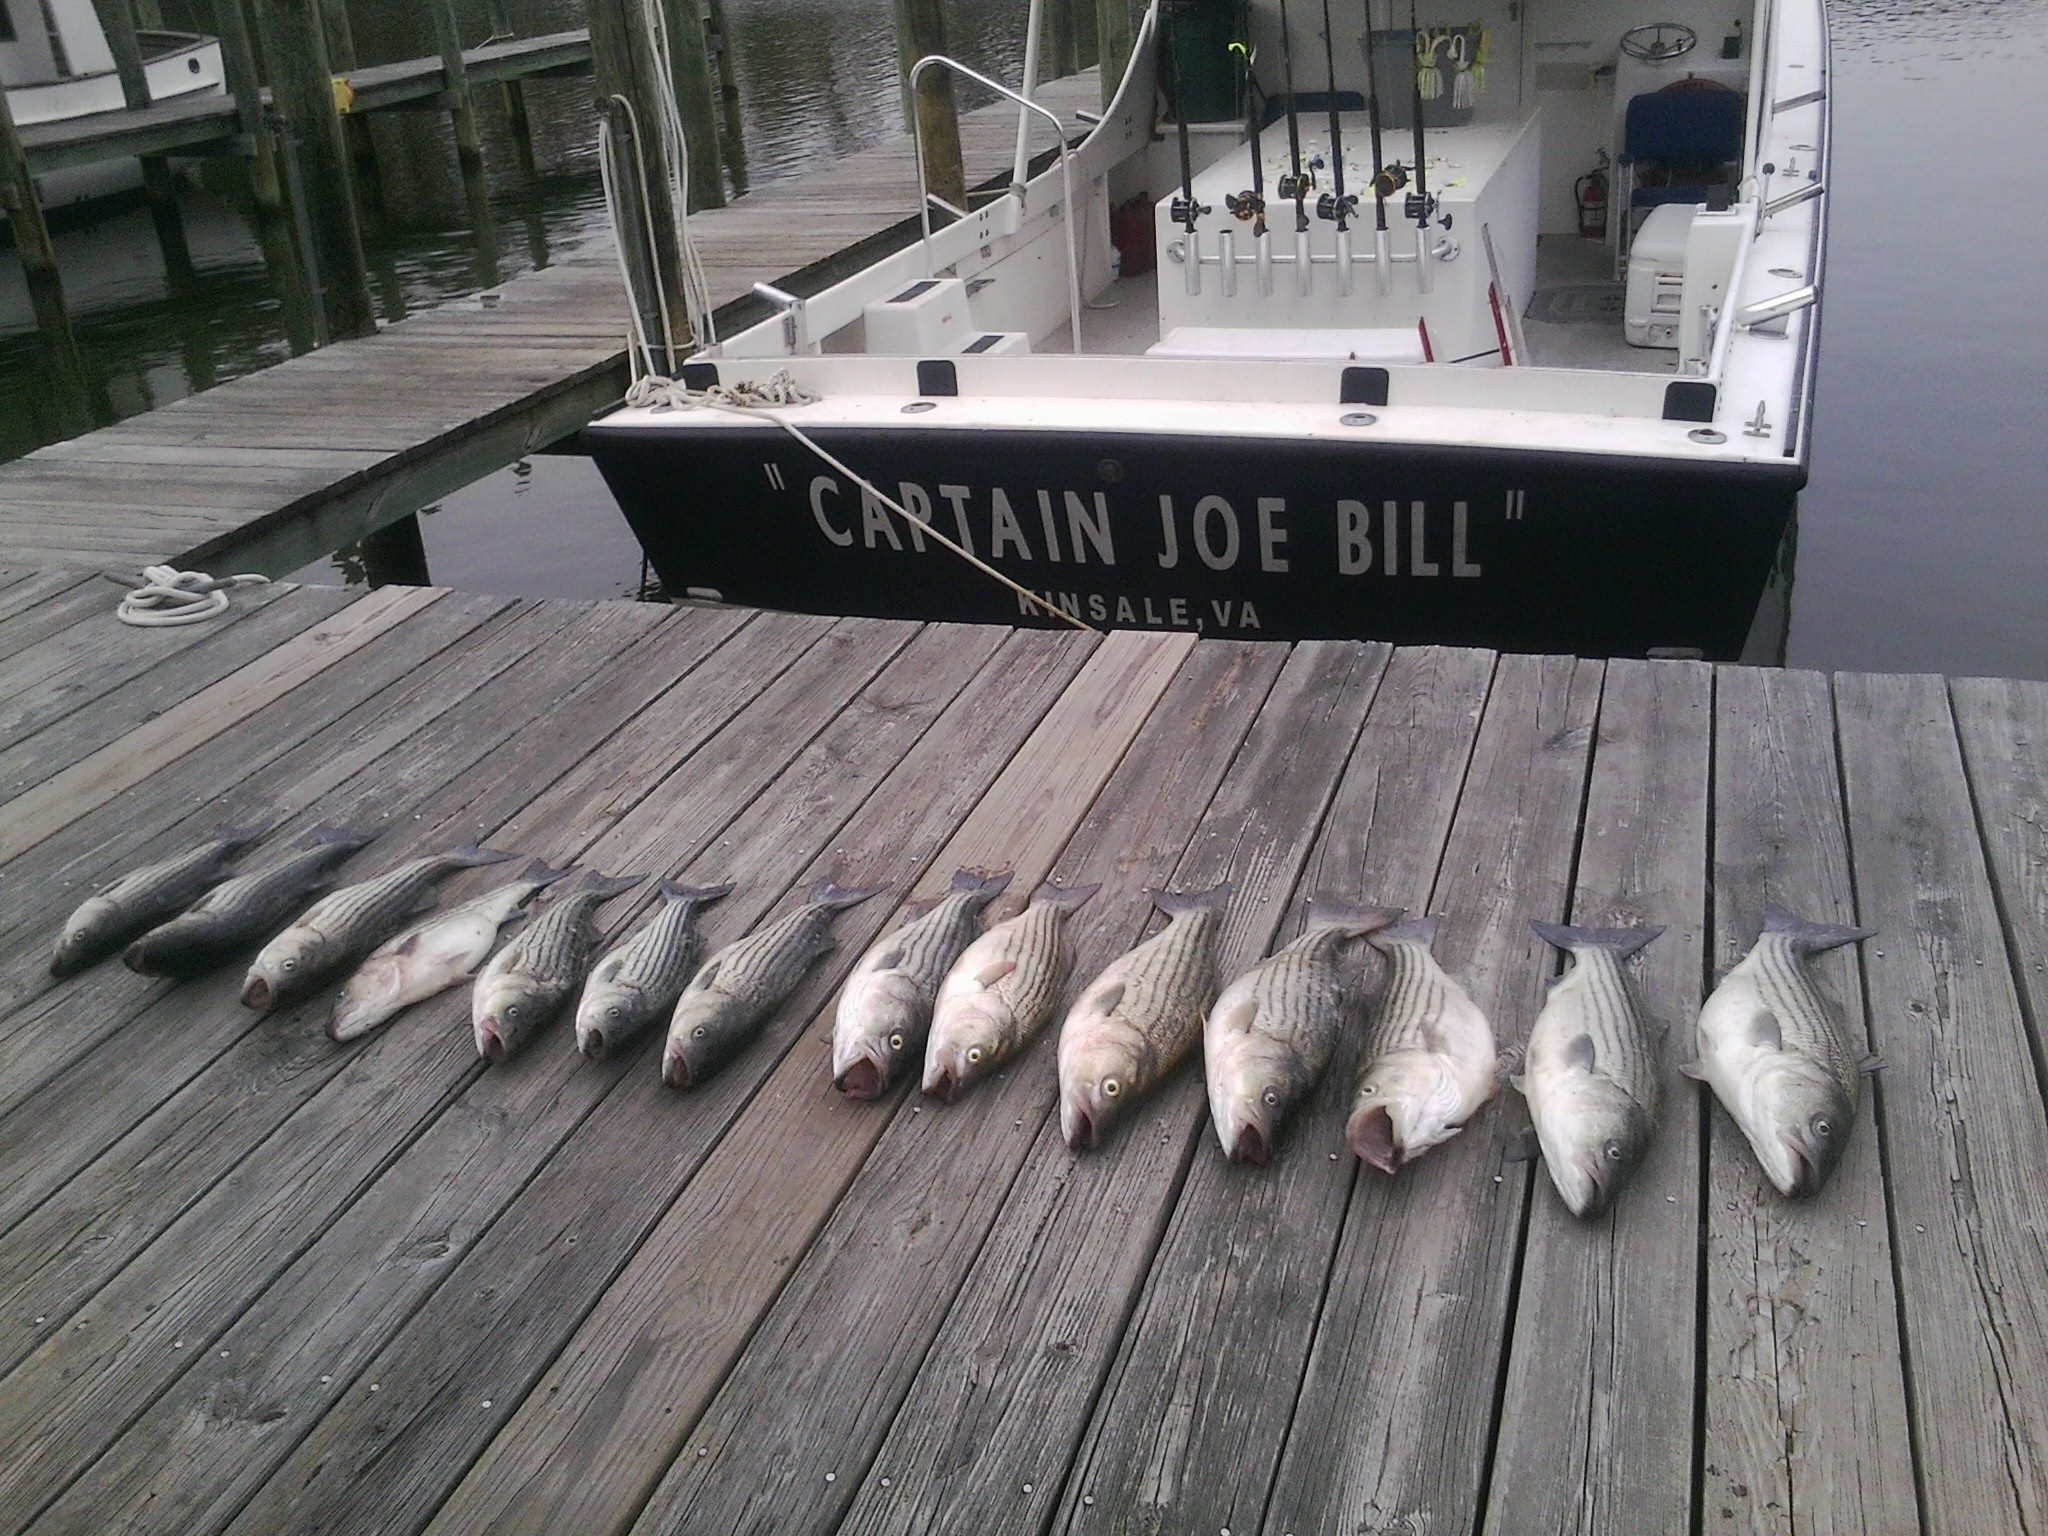 Fish caught and lined up on the dock